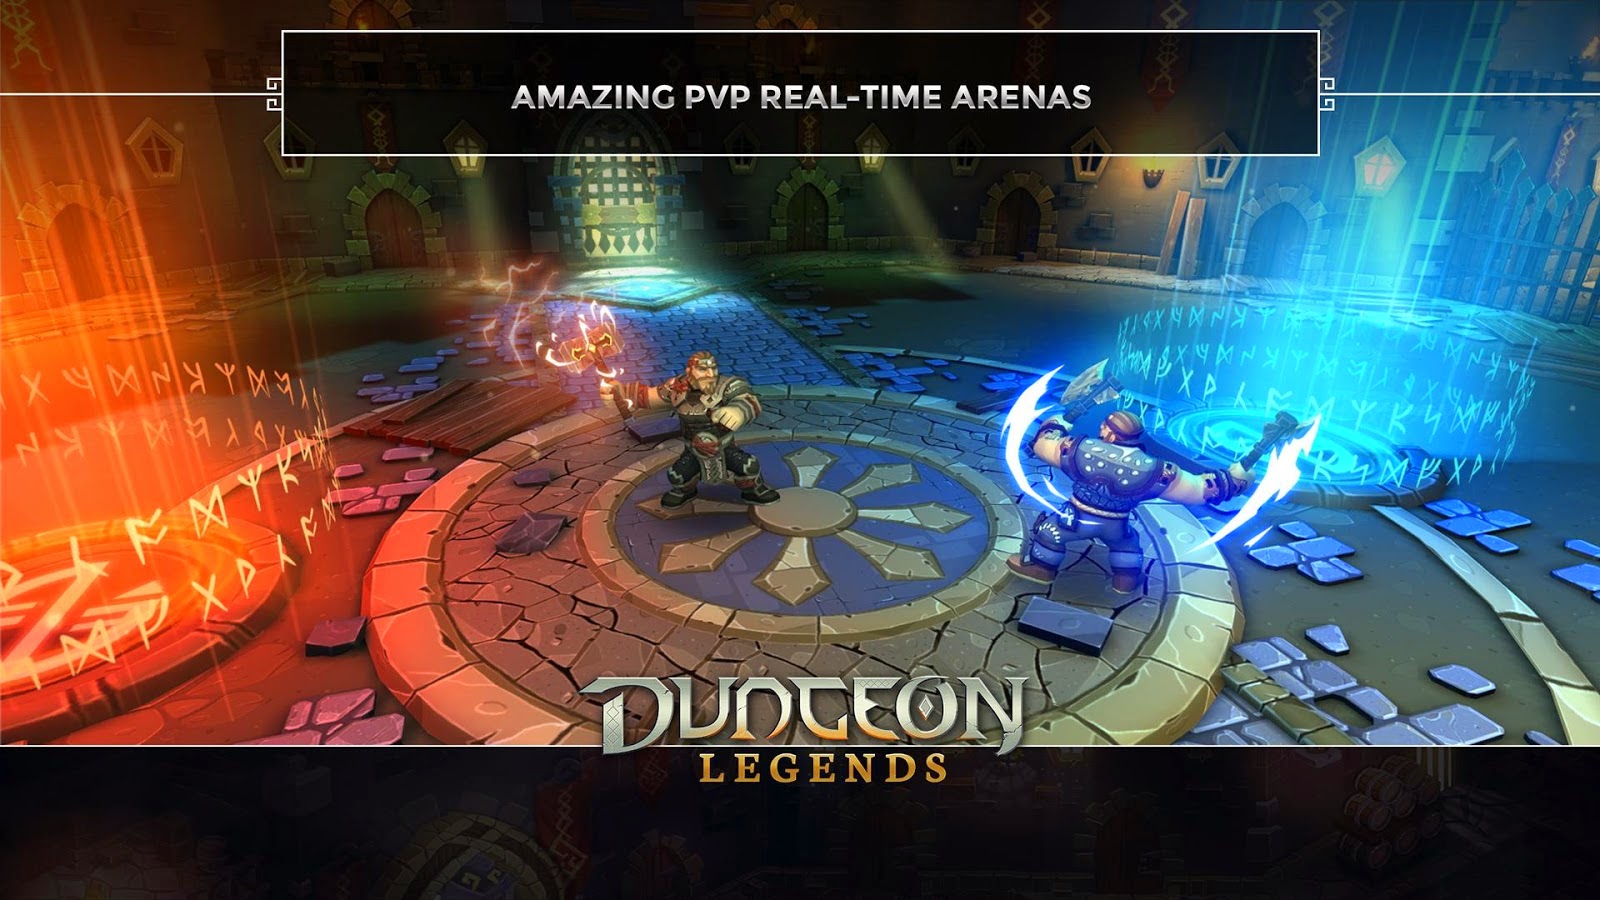 Игра Dungeon Legends. Legend of Dungeon. Time arena